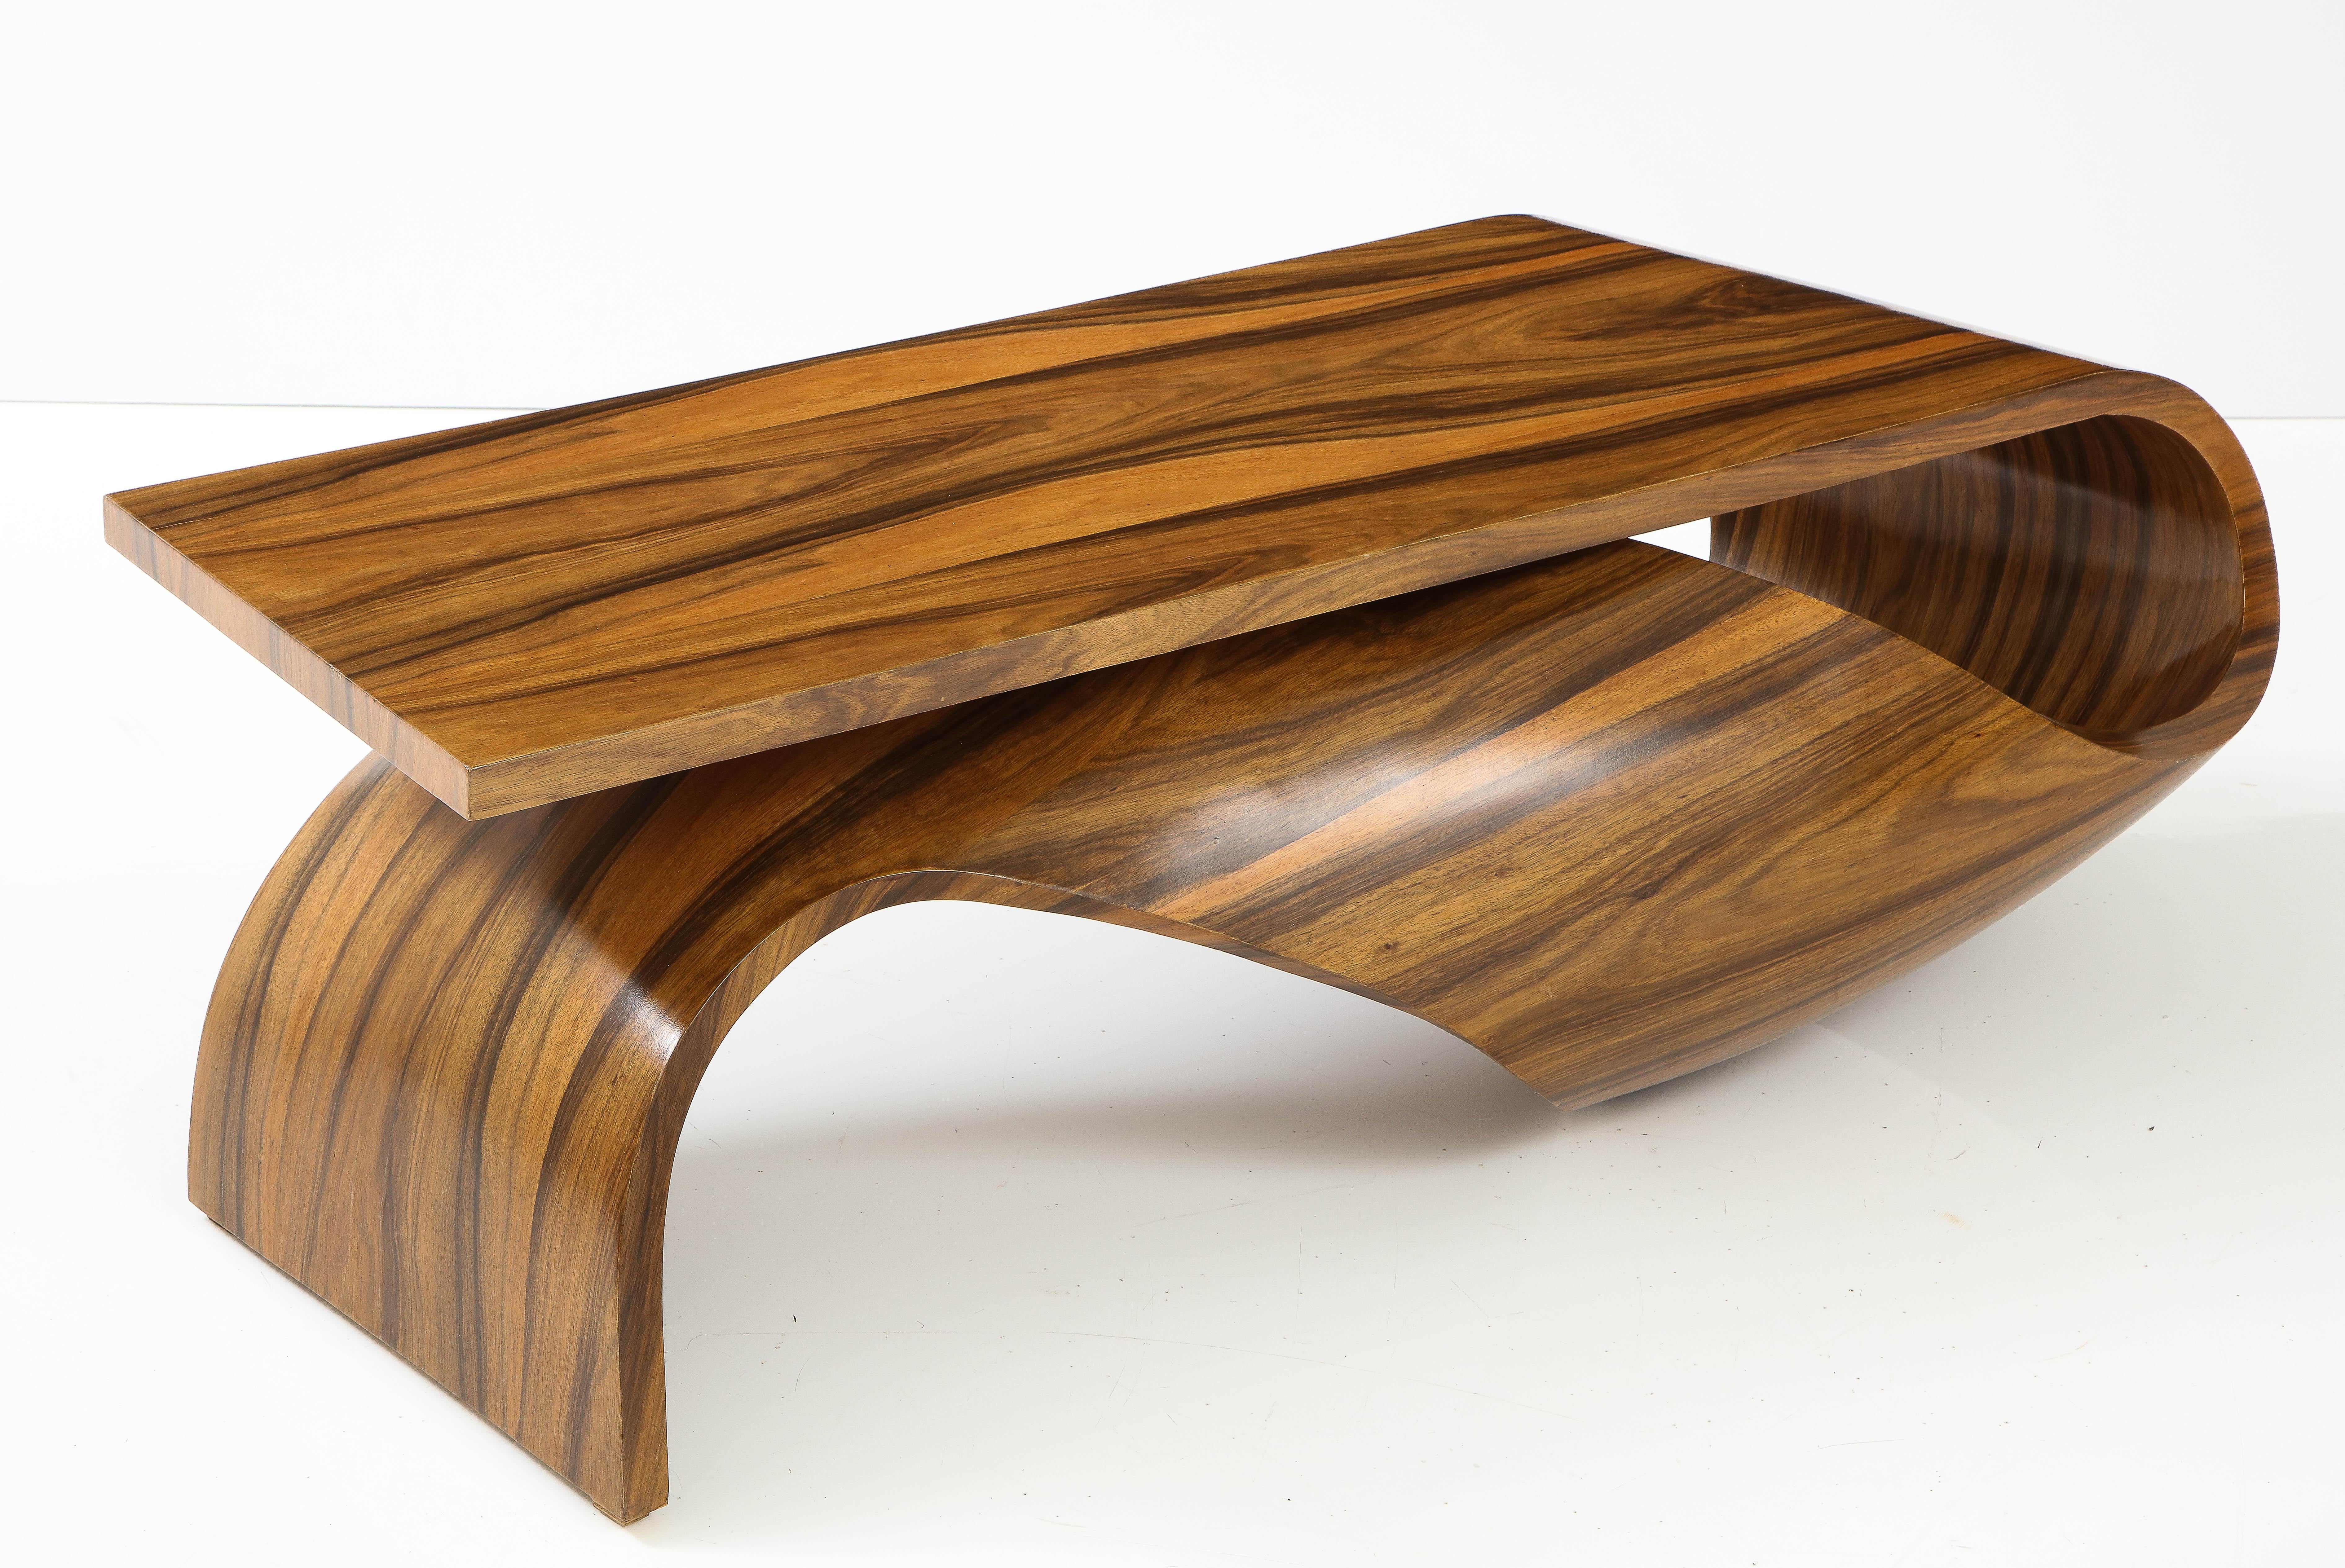 A vintage bentwood coffee table in a single piece of exotic zebra wood with elegant ribbon-like curves and undulating surfaces with a rectangular top resting on one curved side and a triangular ebonized leg on the other. This cocktail table is a